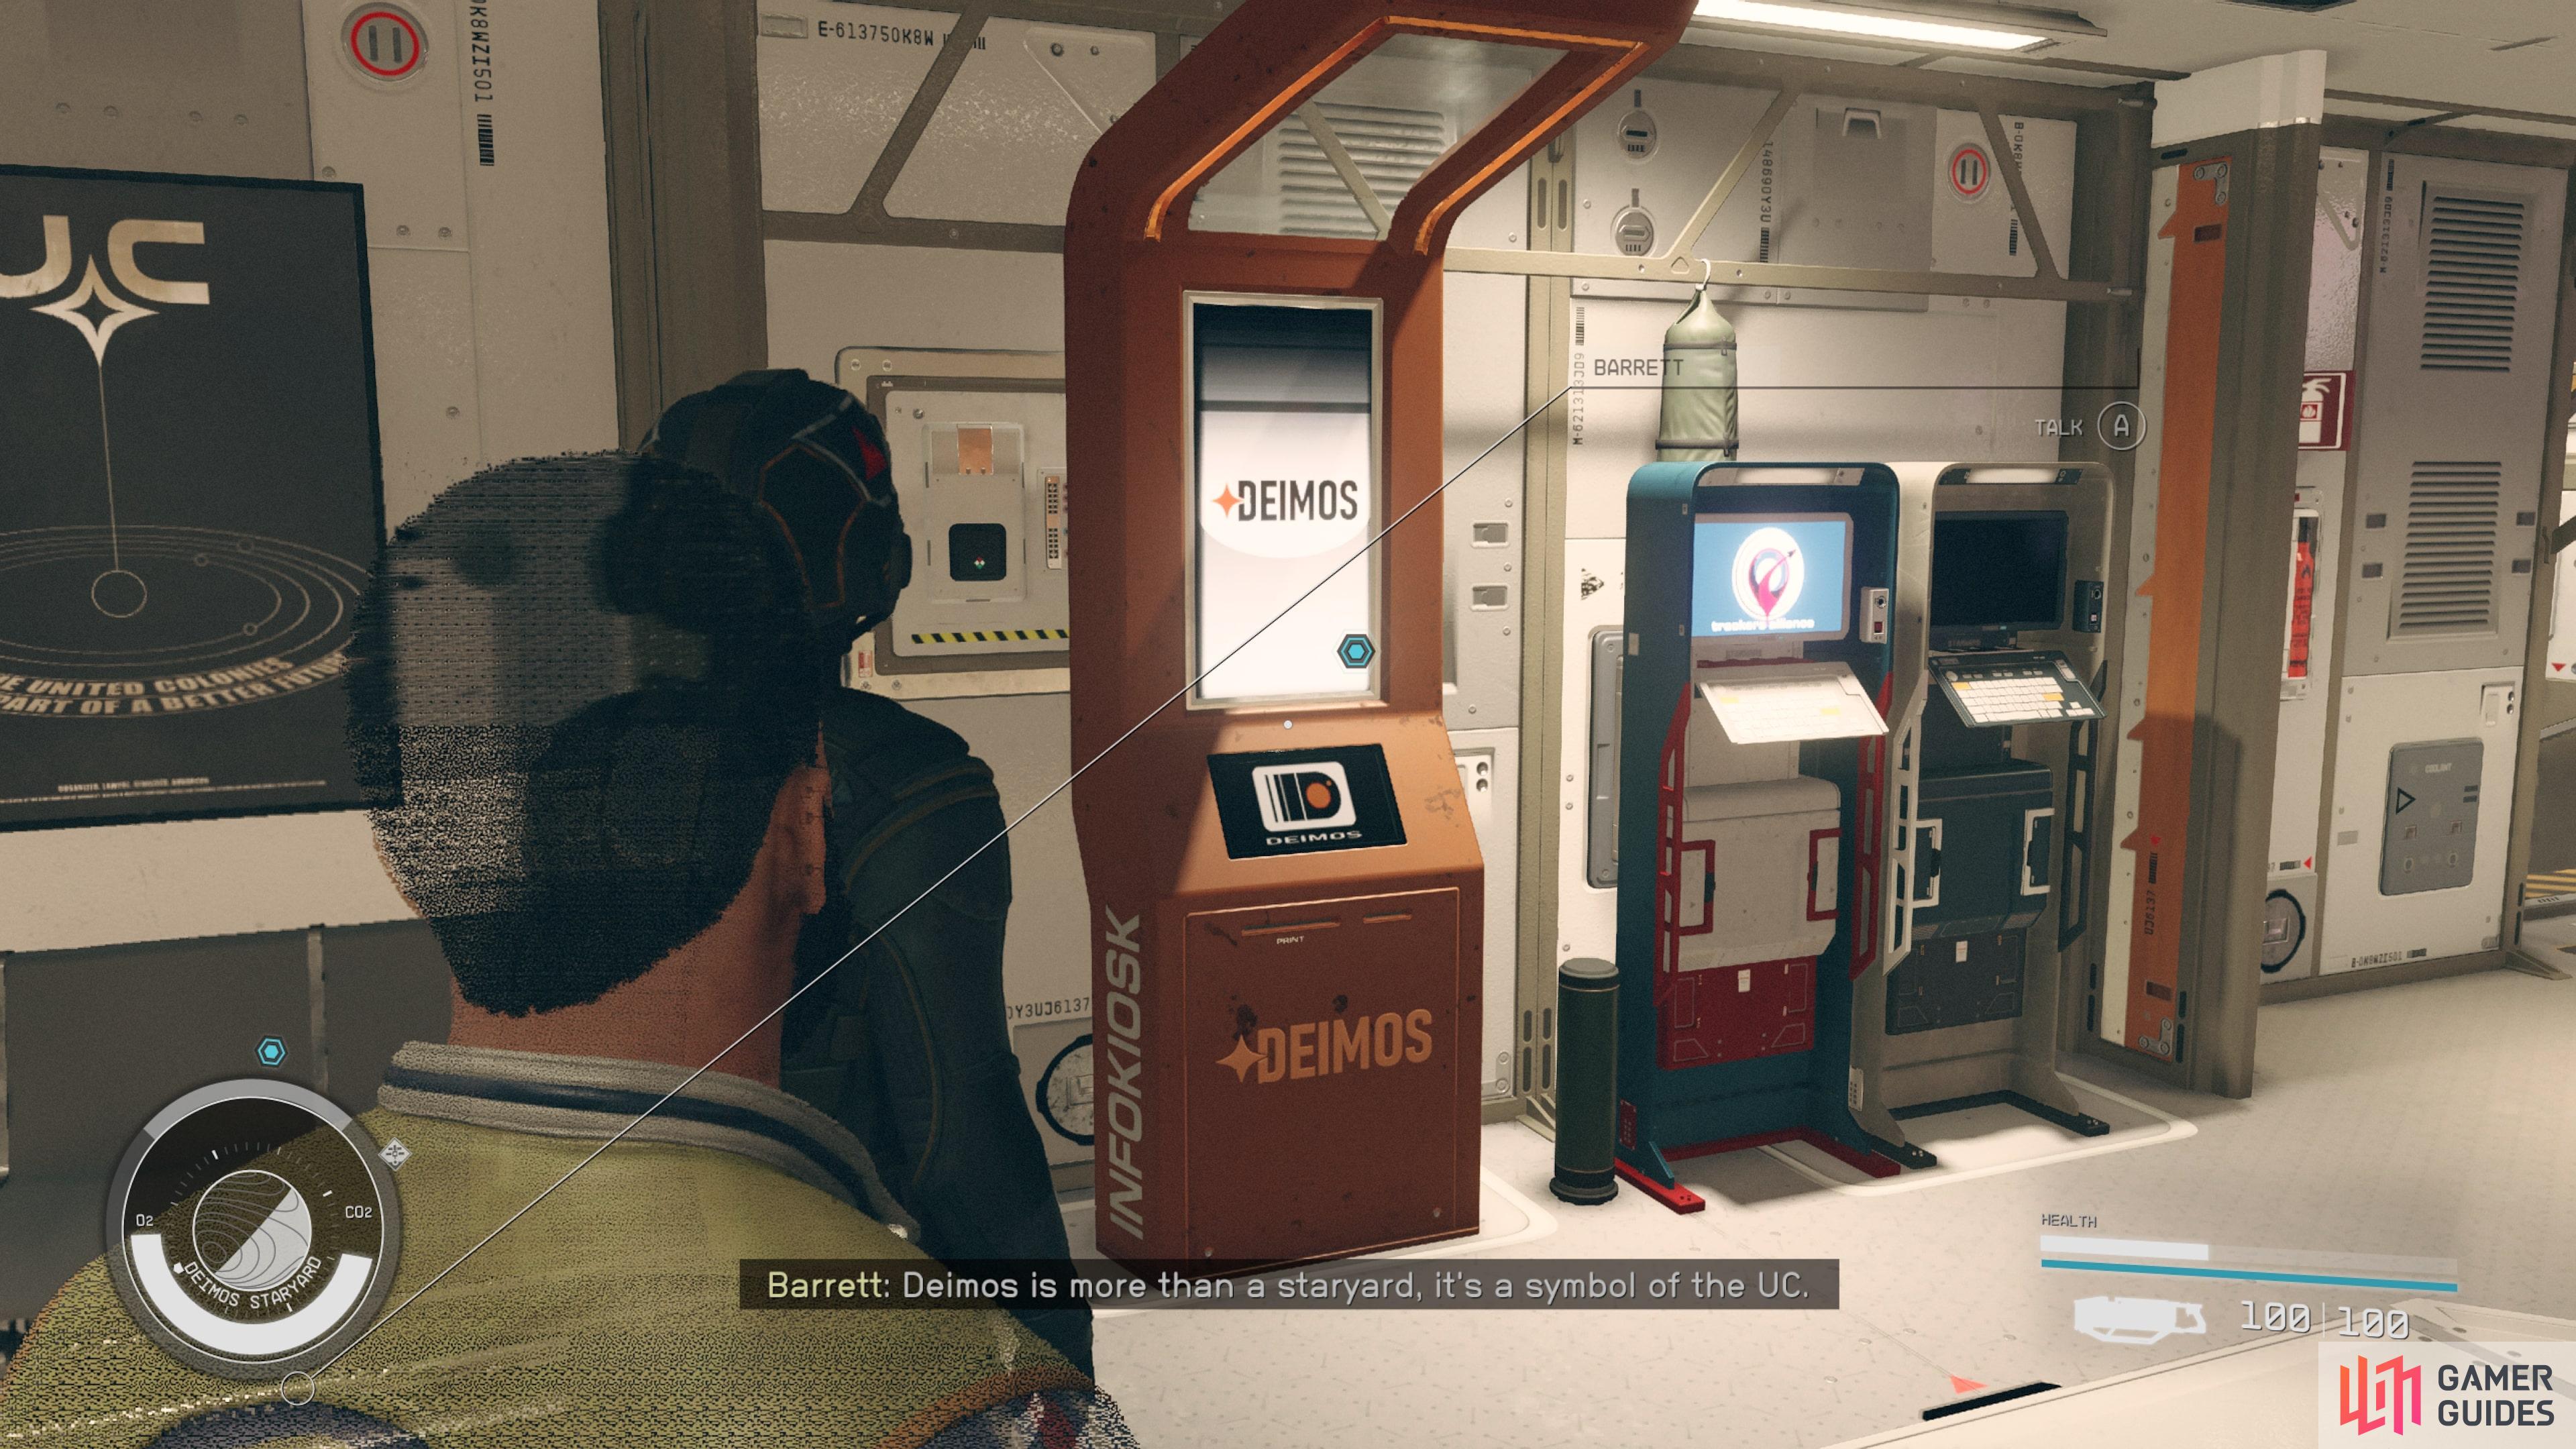 You will see the info kiosk shortly after you walk into the Deimos Staryard.